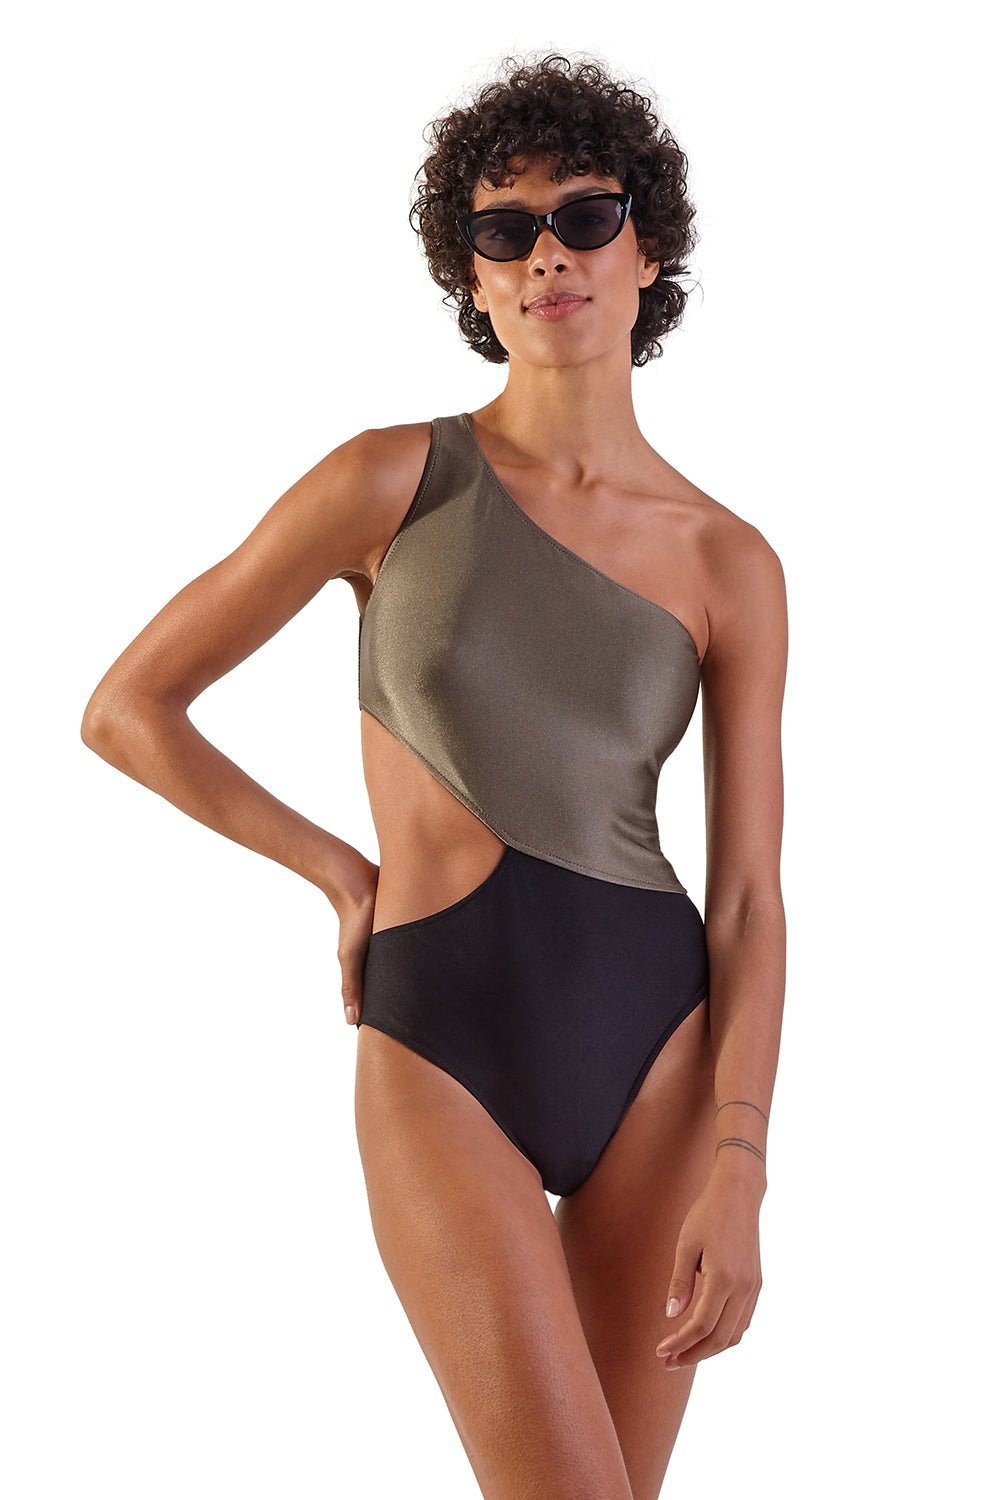 One-shoulder black and green One Piece swimsuit